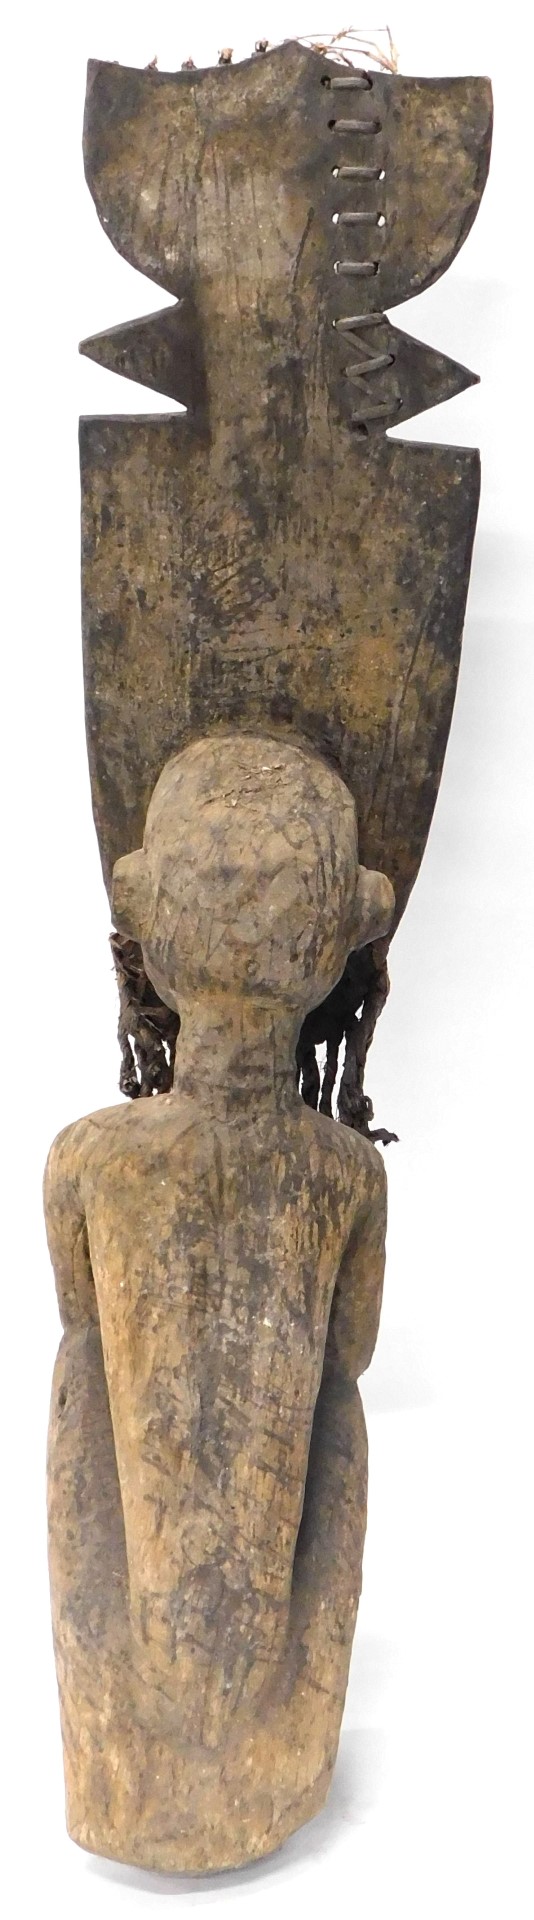 A Grebo (Kru) warrior funeral figure, Liberia, with certificate, 124cm high. - Image 3 of 5